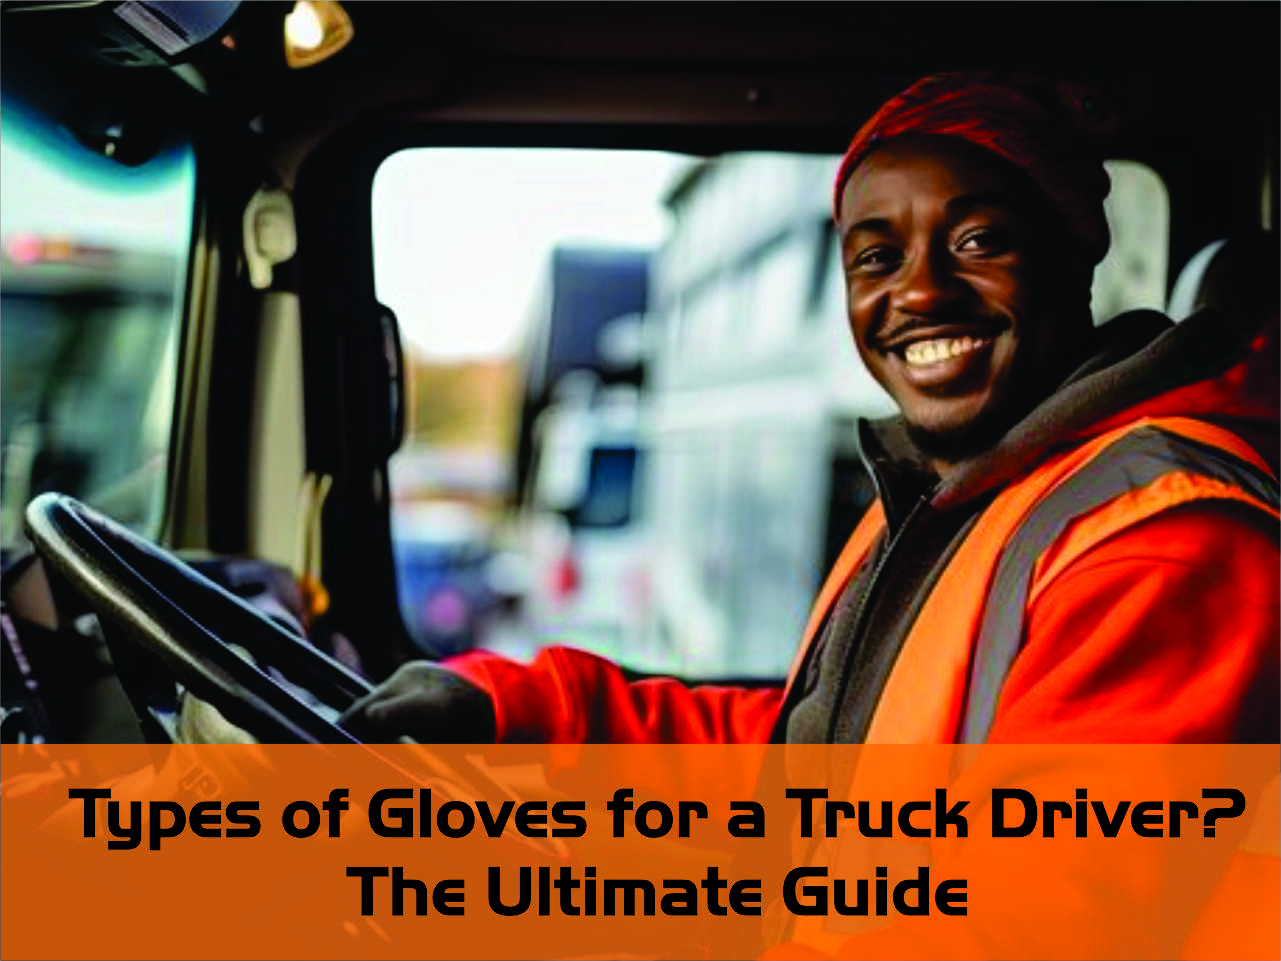 You are currently viewing Types of Gloves for a Truck Driver? The Ultimate Guide